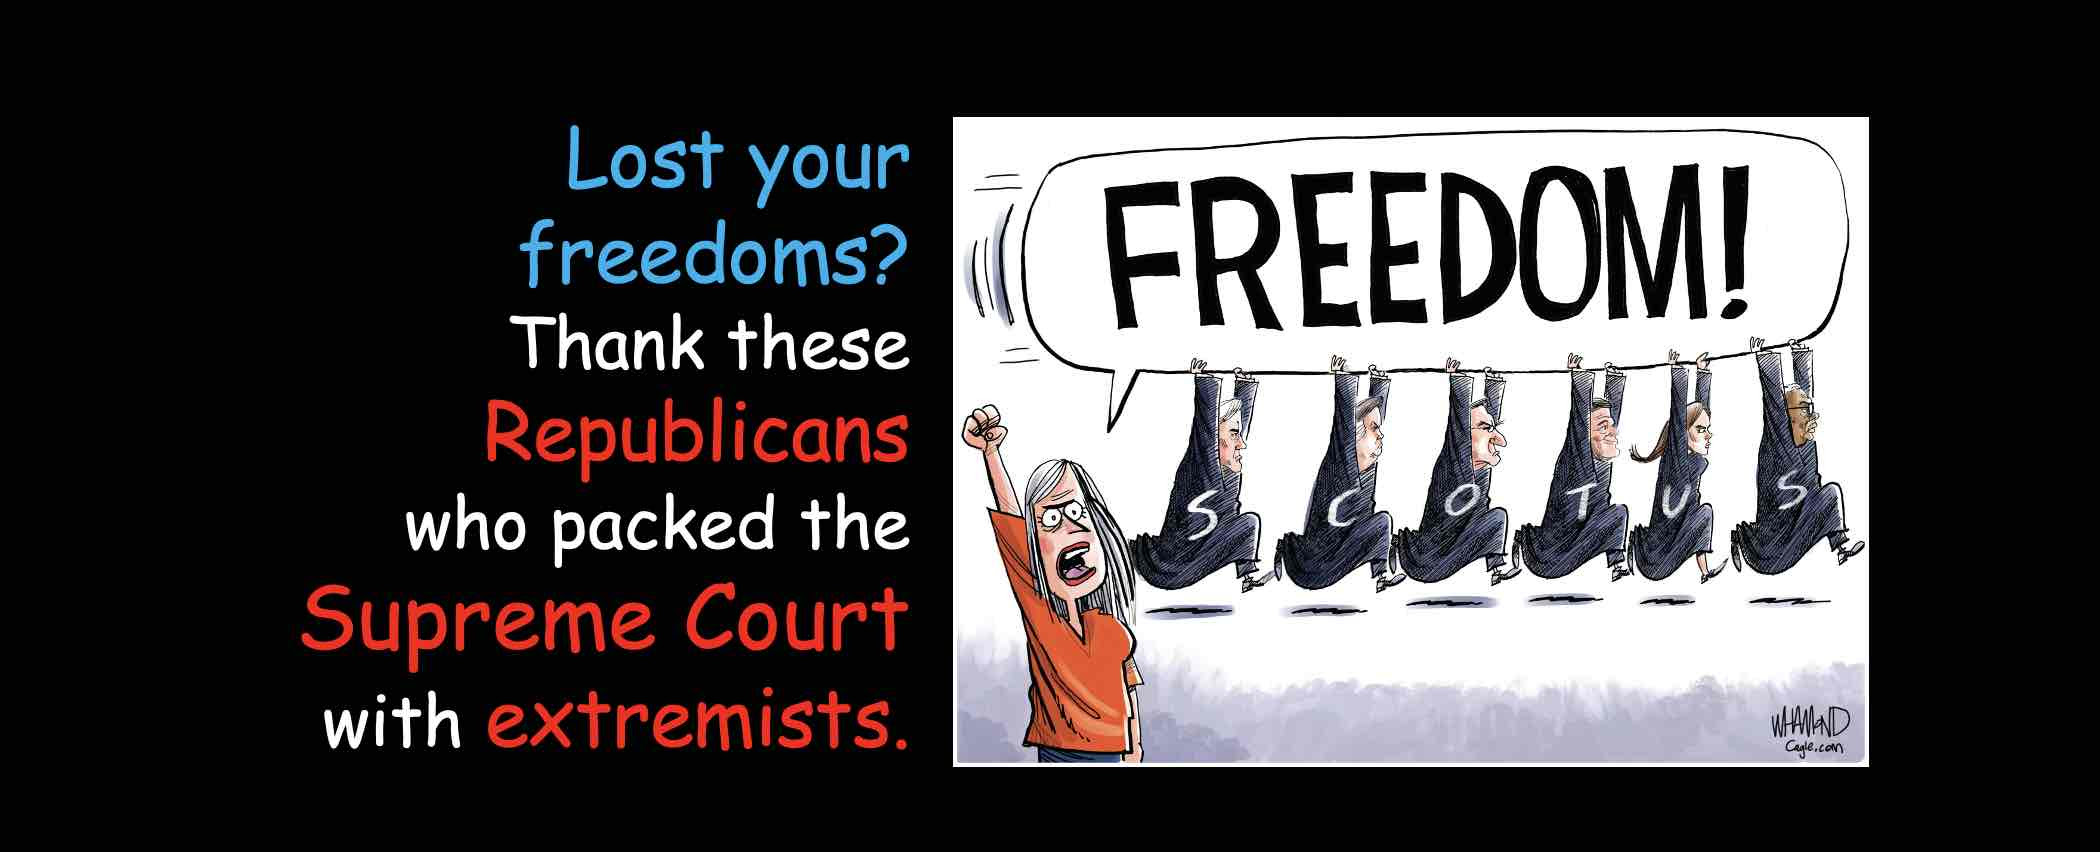 Republicans have hijacked the US supreme court. Hold the Senators who packed the court with extremists accountable for their votes.